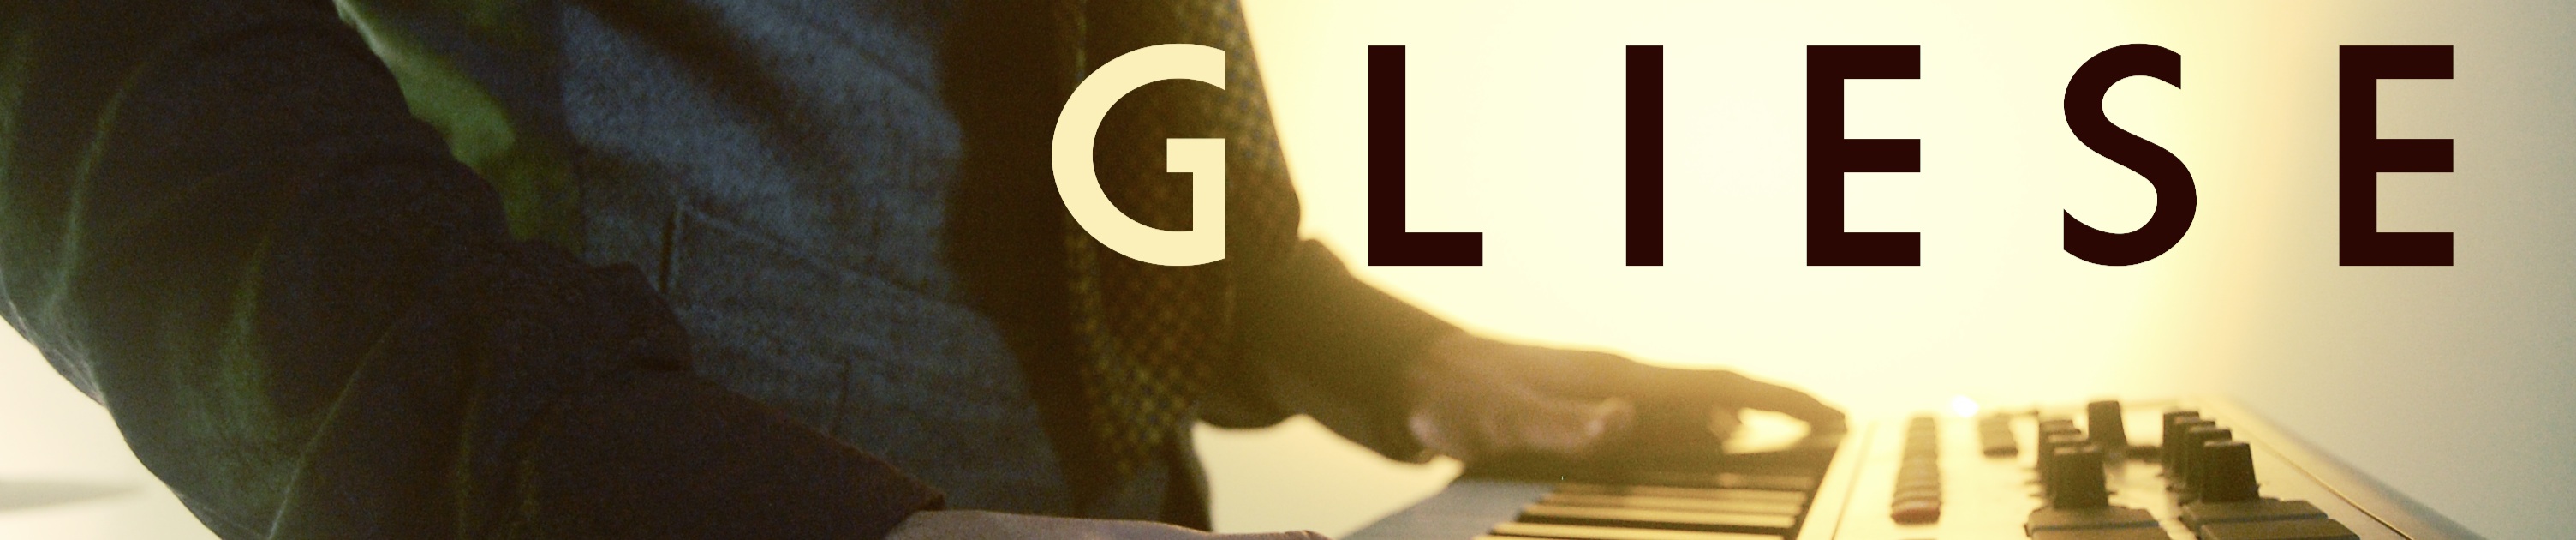 Gliese: albums, songs, playlists